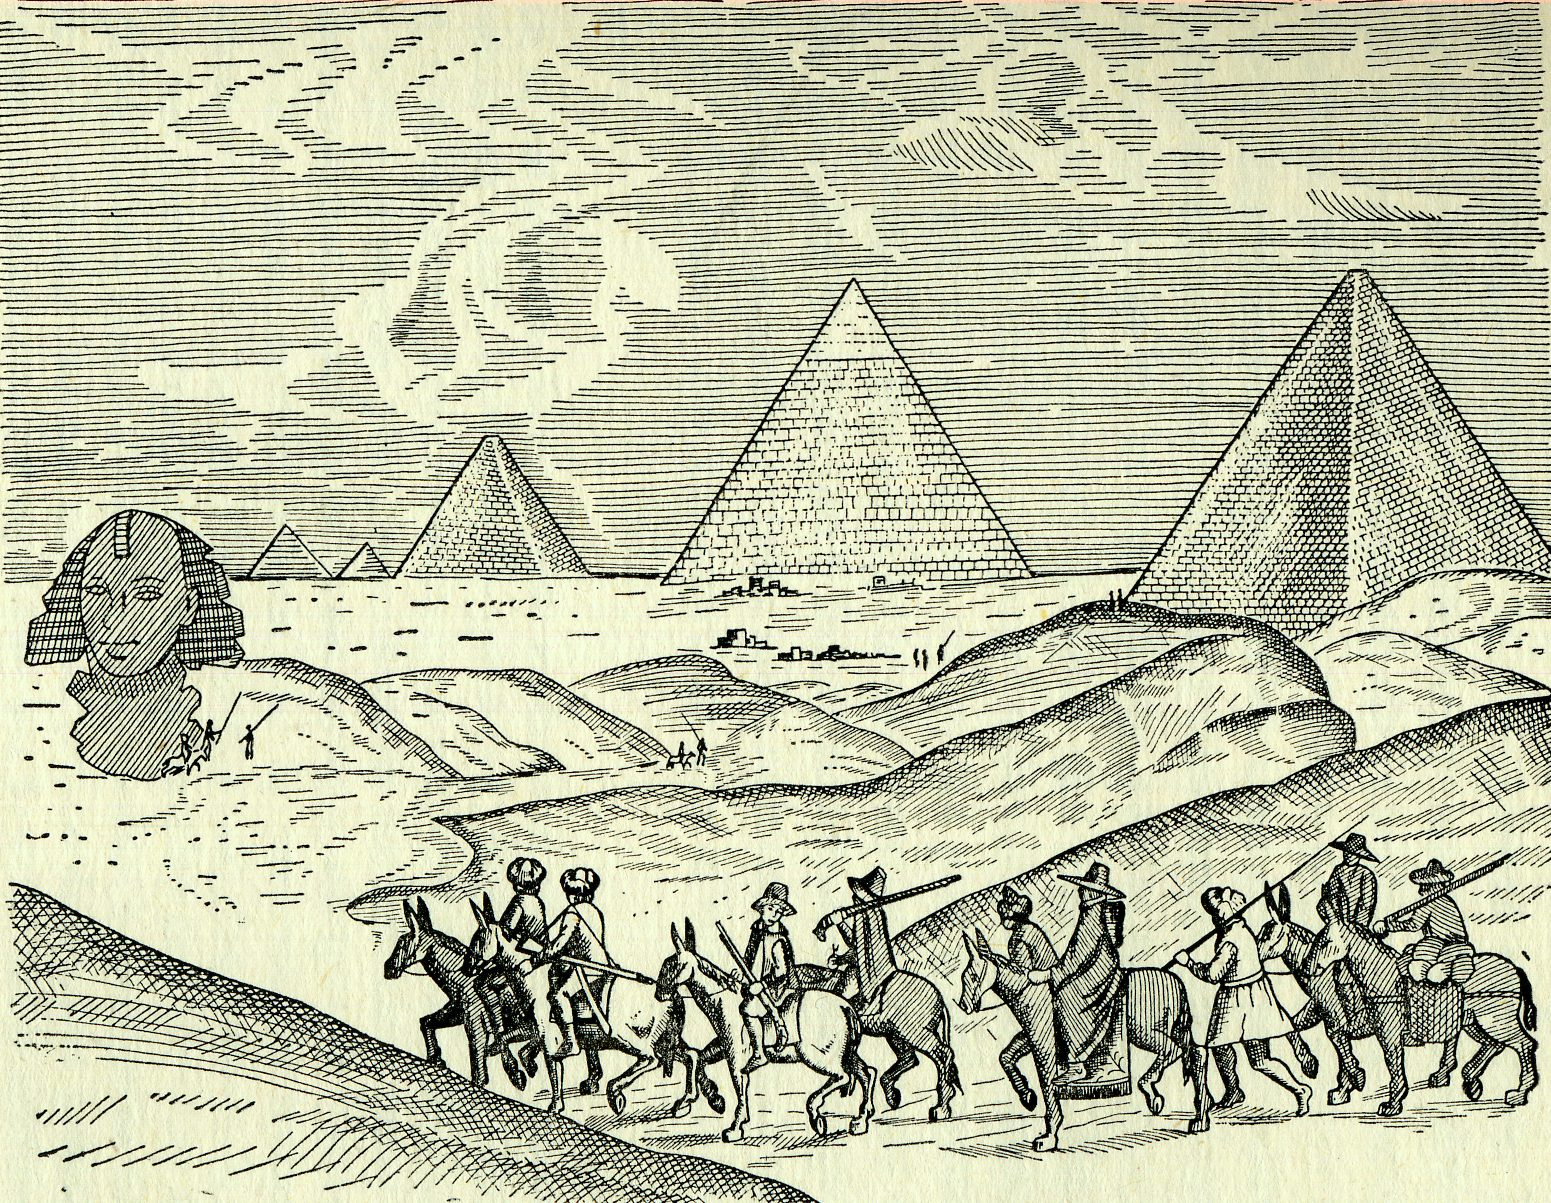 The Great Sphinx of Giza in George Sandys, A relation of a journey begun an dom. 1610 (1615)